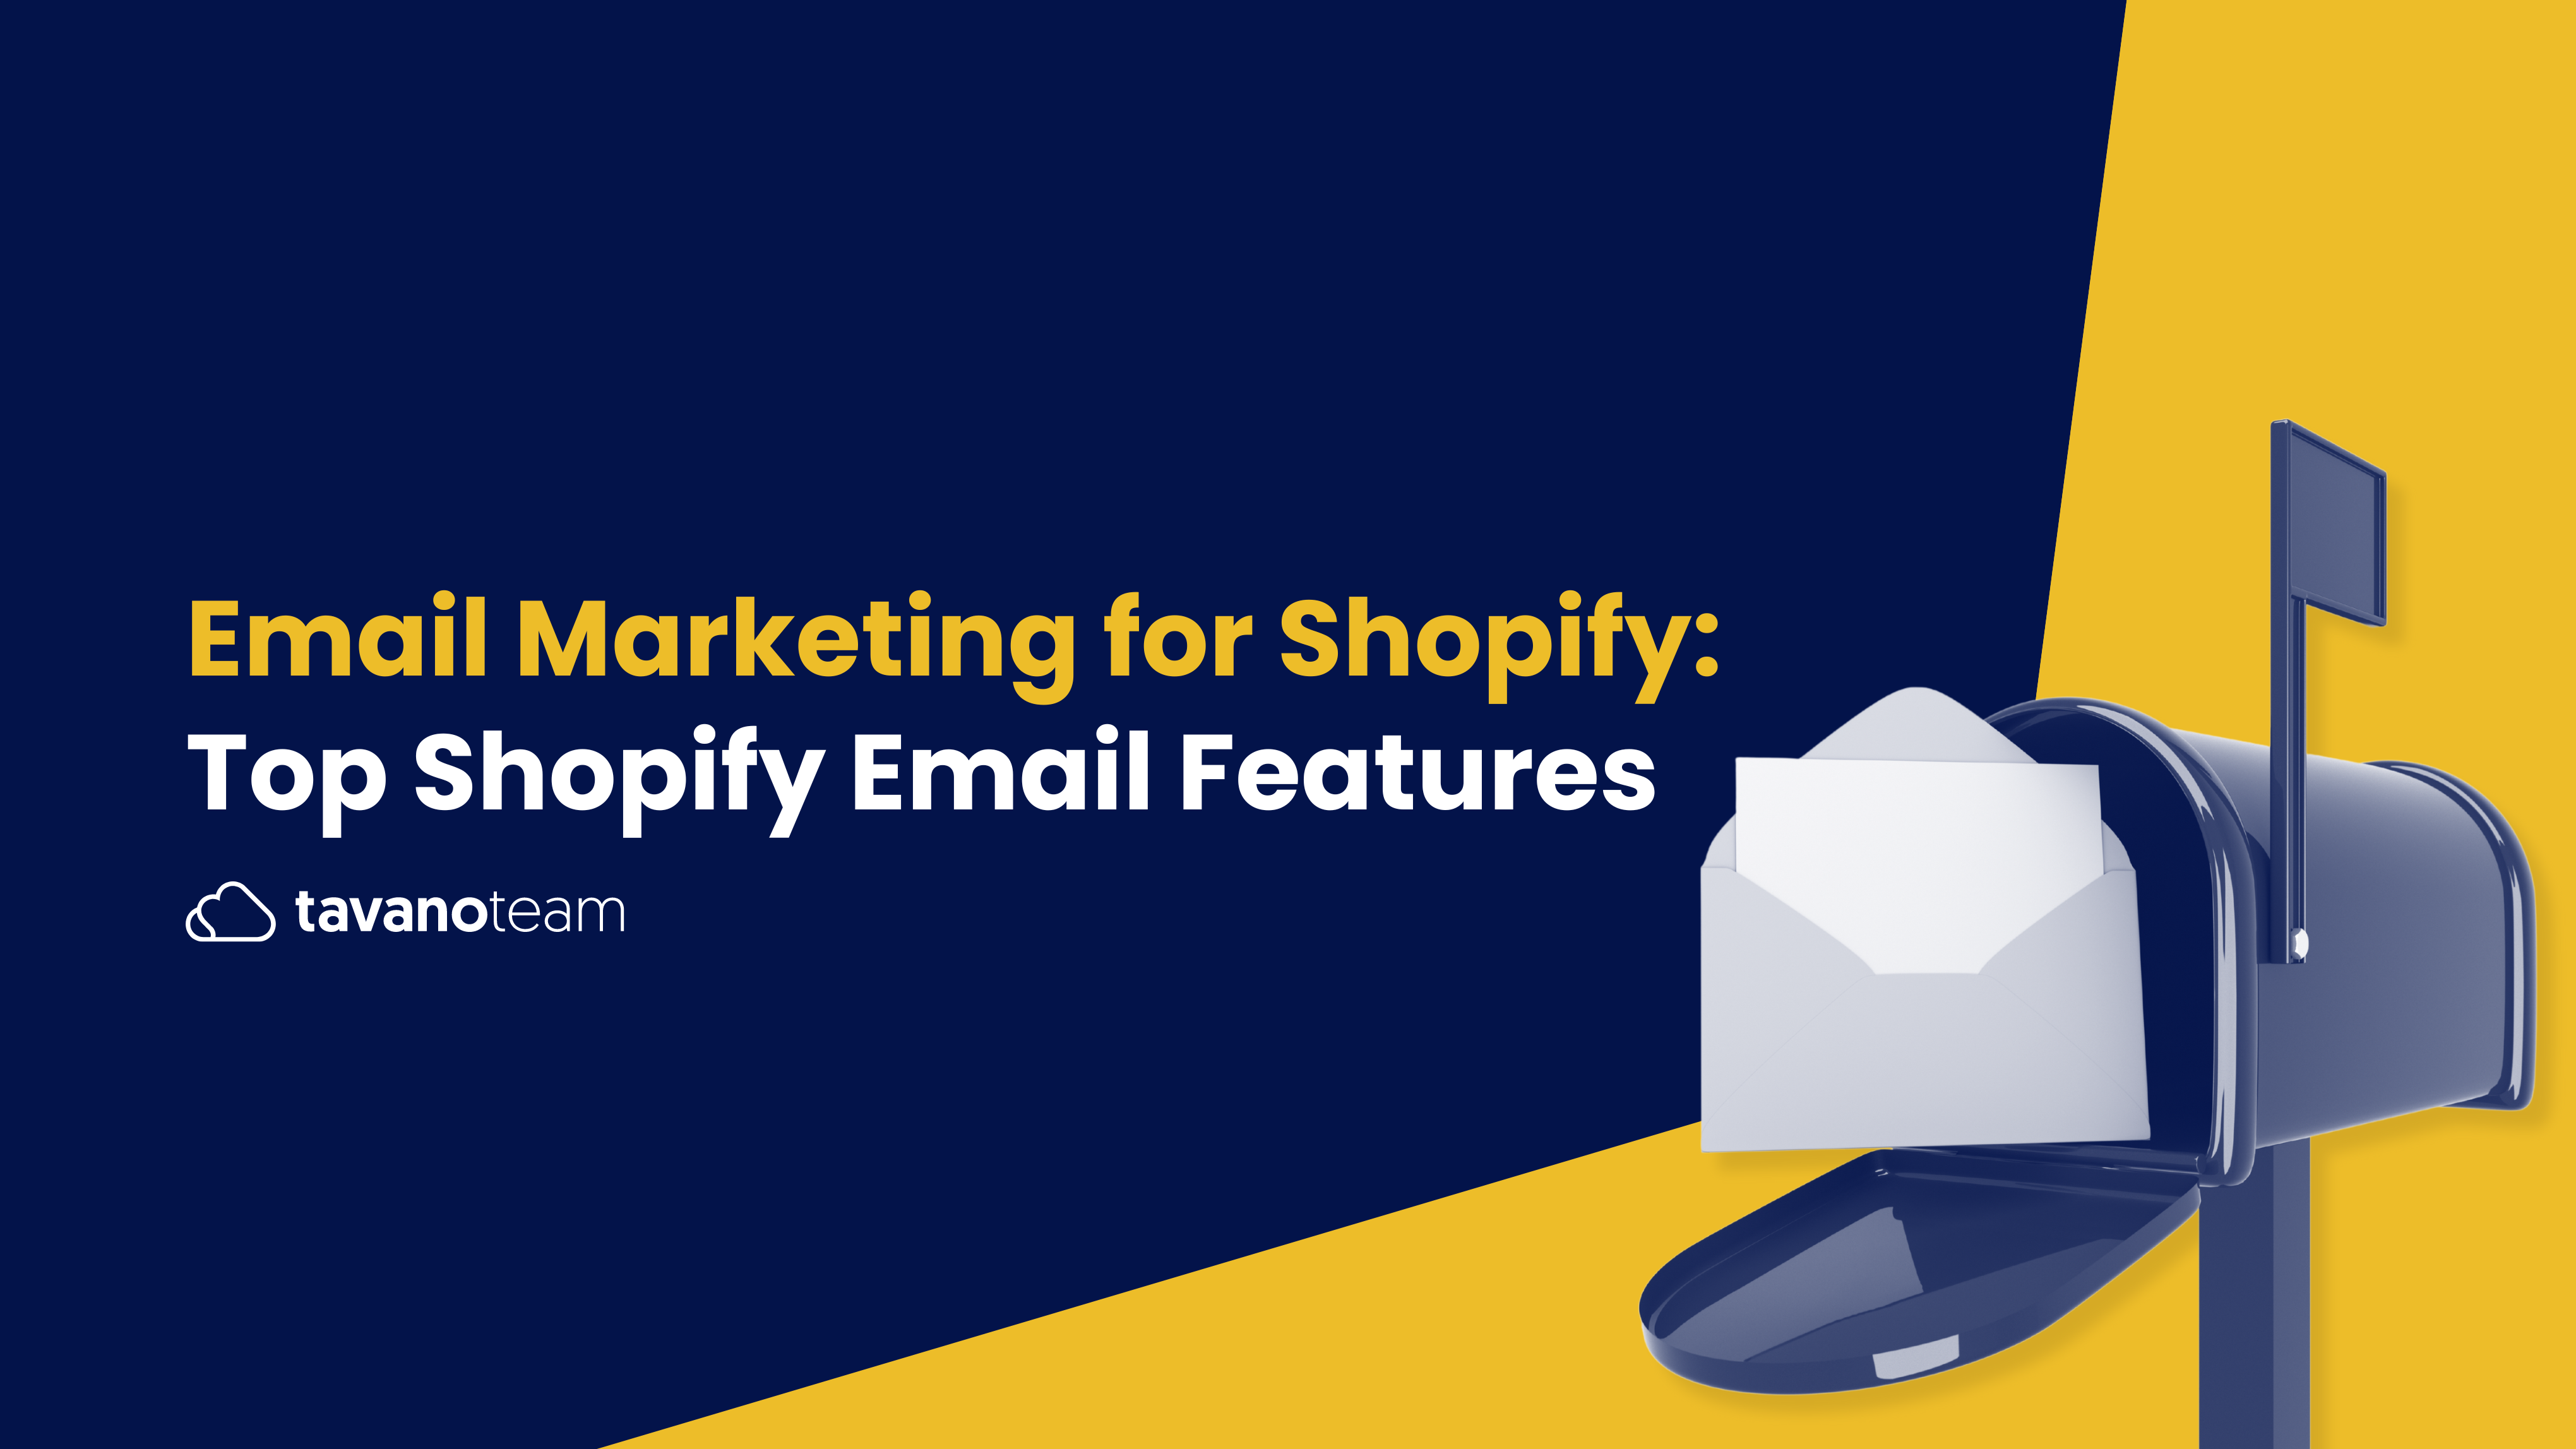 Email-marketing-for-Shopify-Top-Shopify-Email-Features